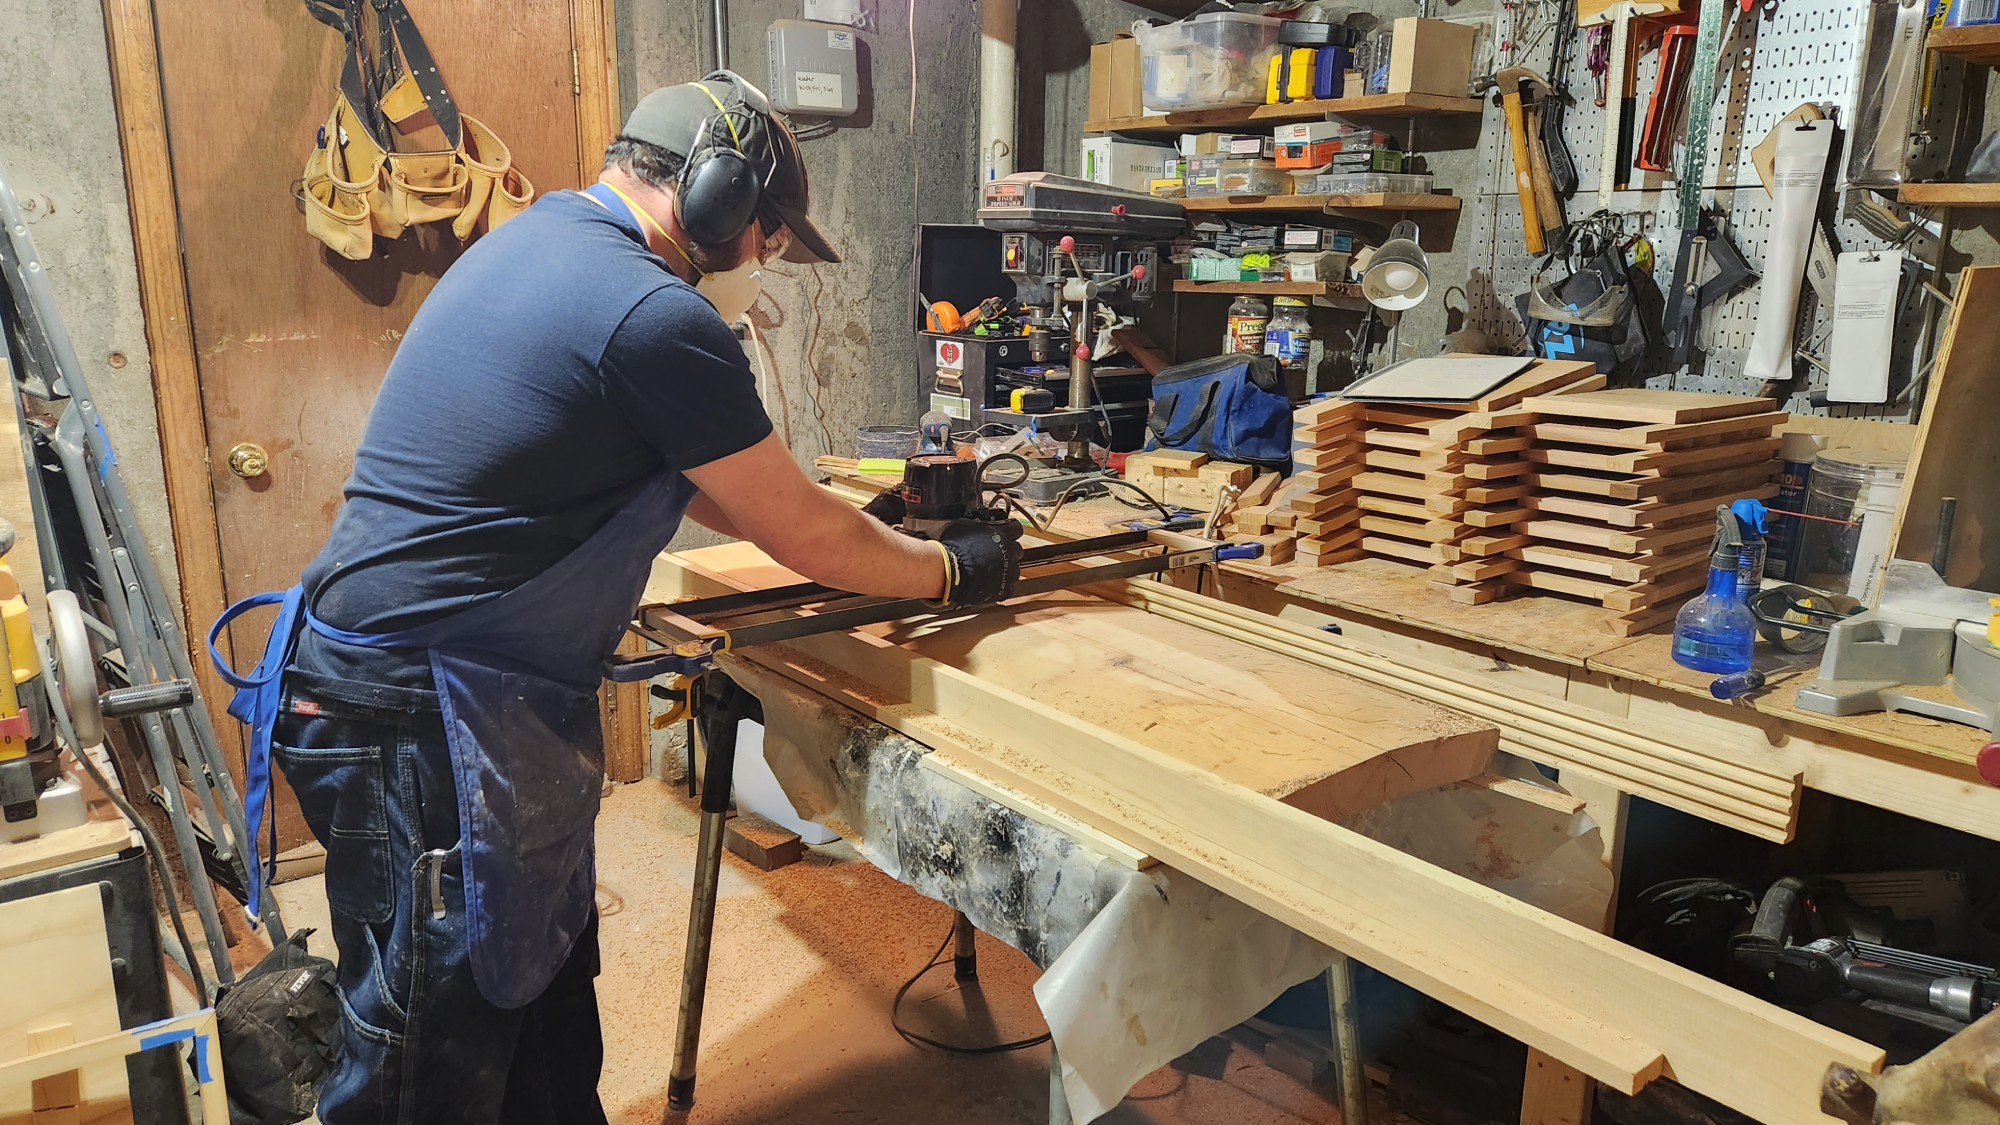 Want to work with wood? Find the right path to a woodworking